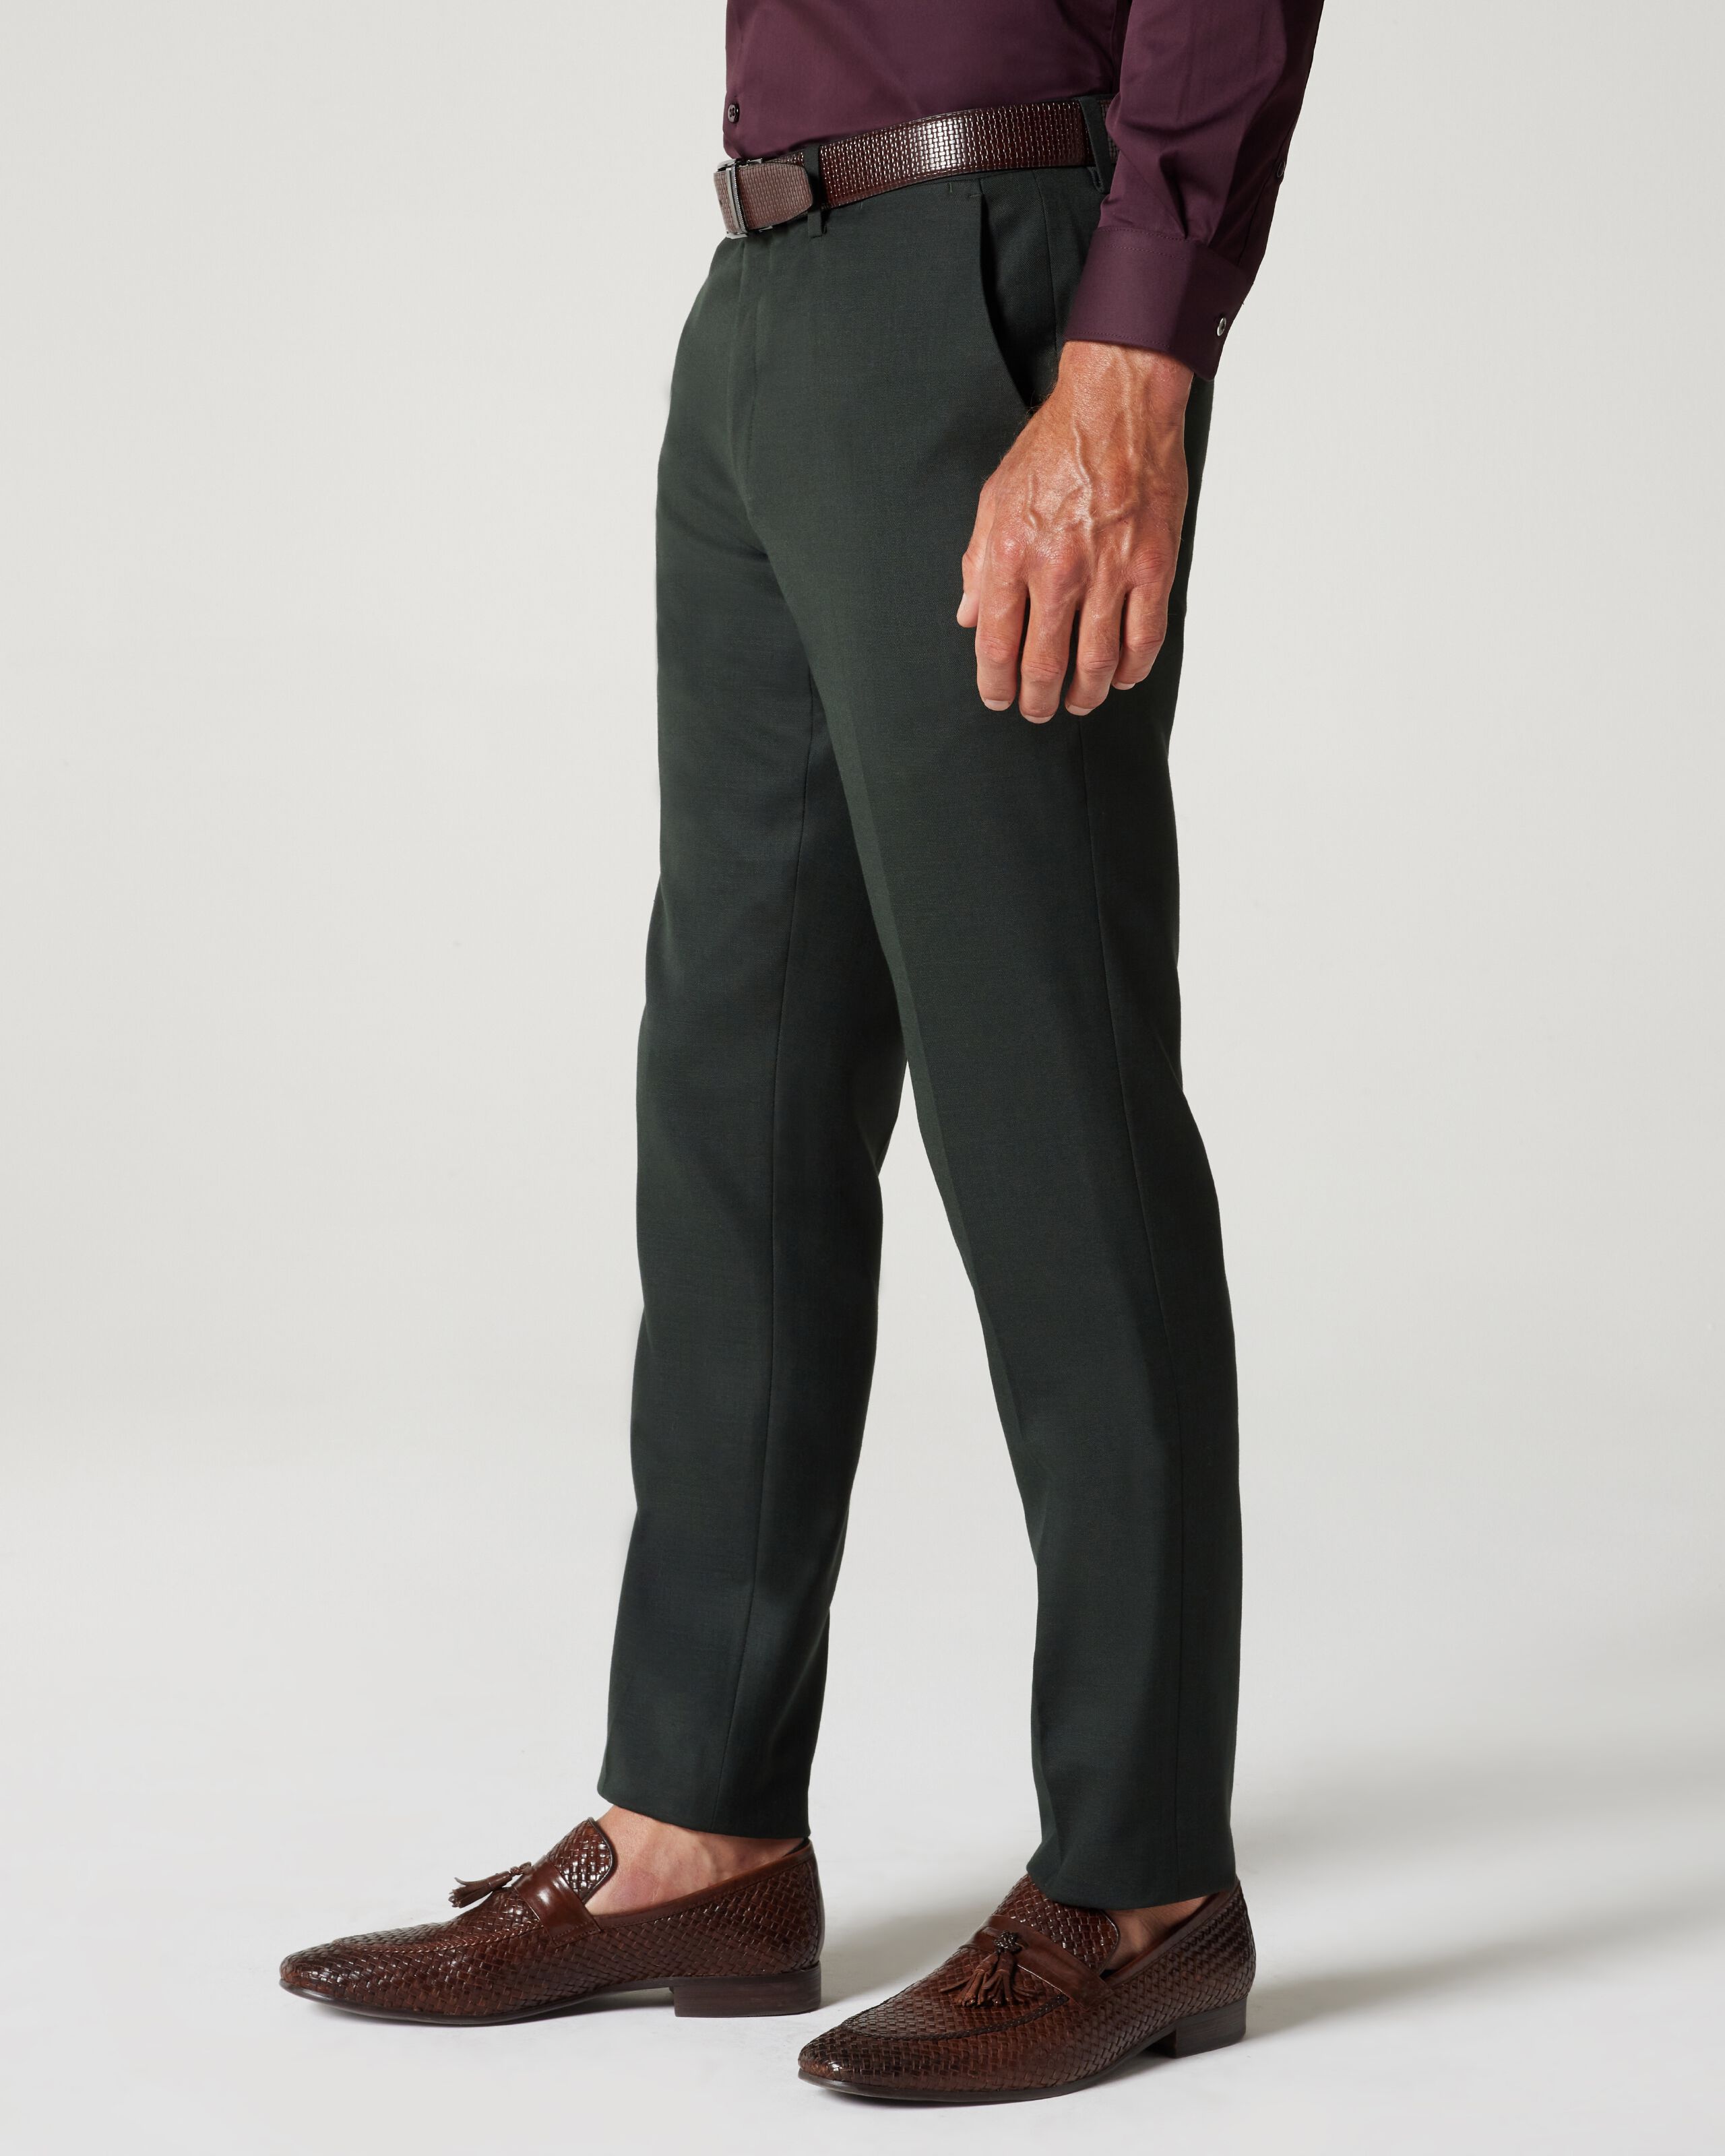 Shop Latest Dark Olive Mens Stretch Pants Online in India